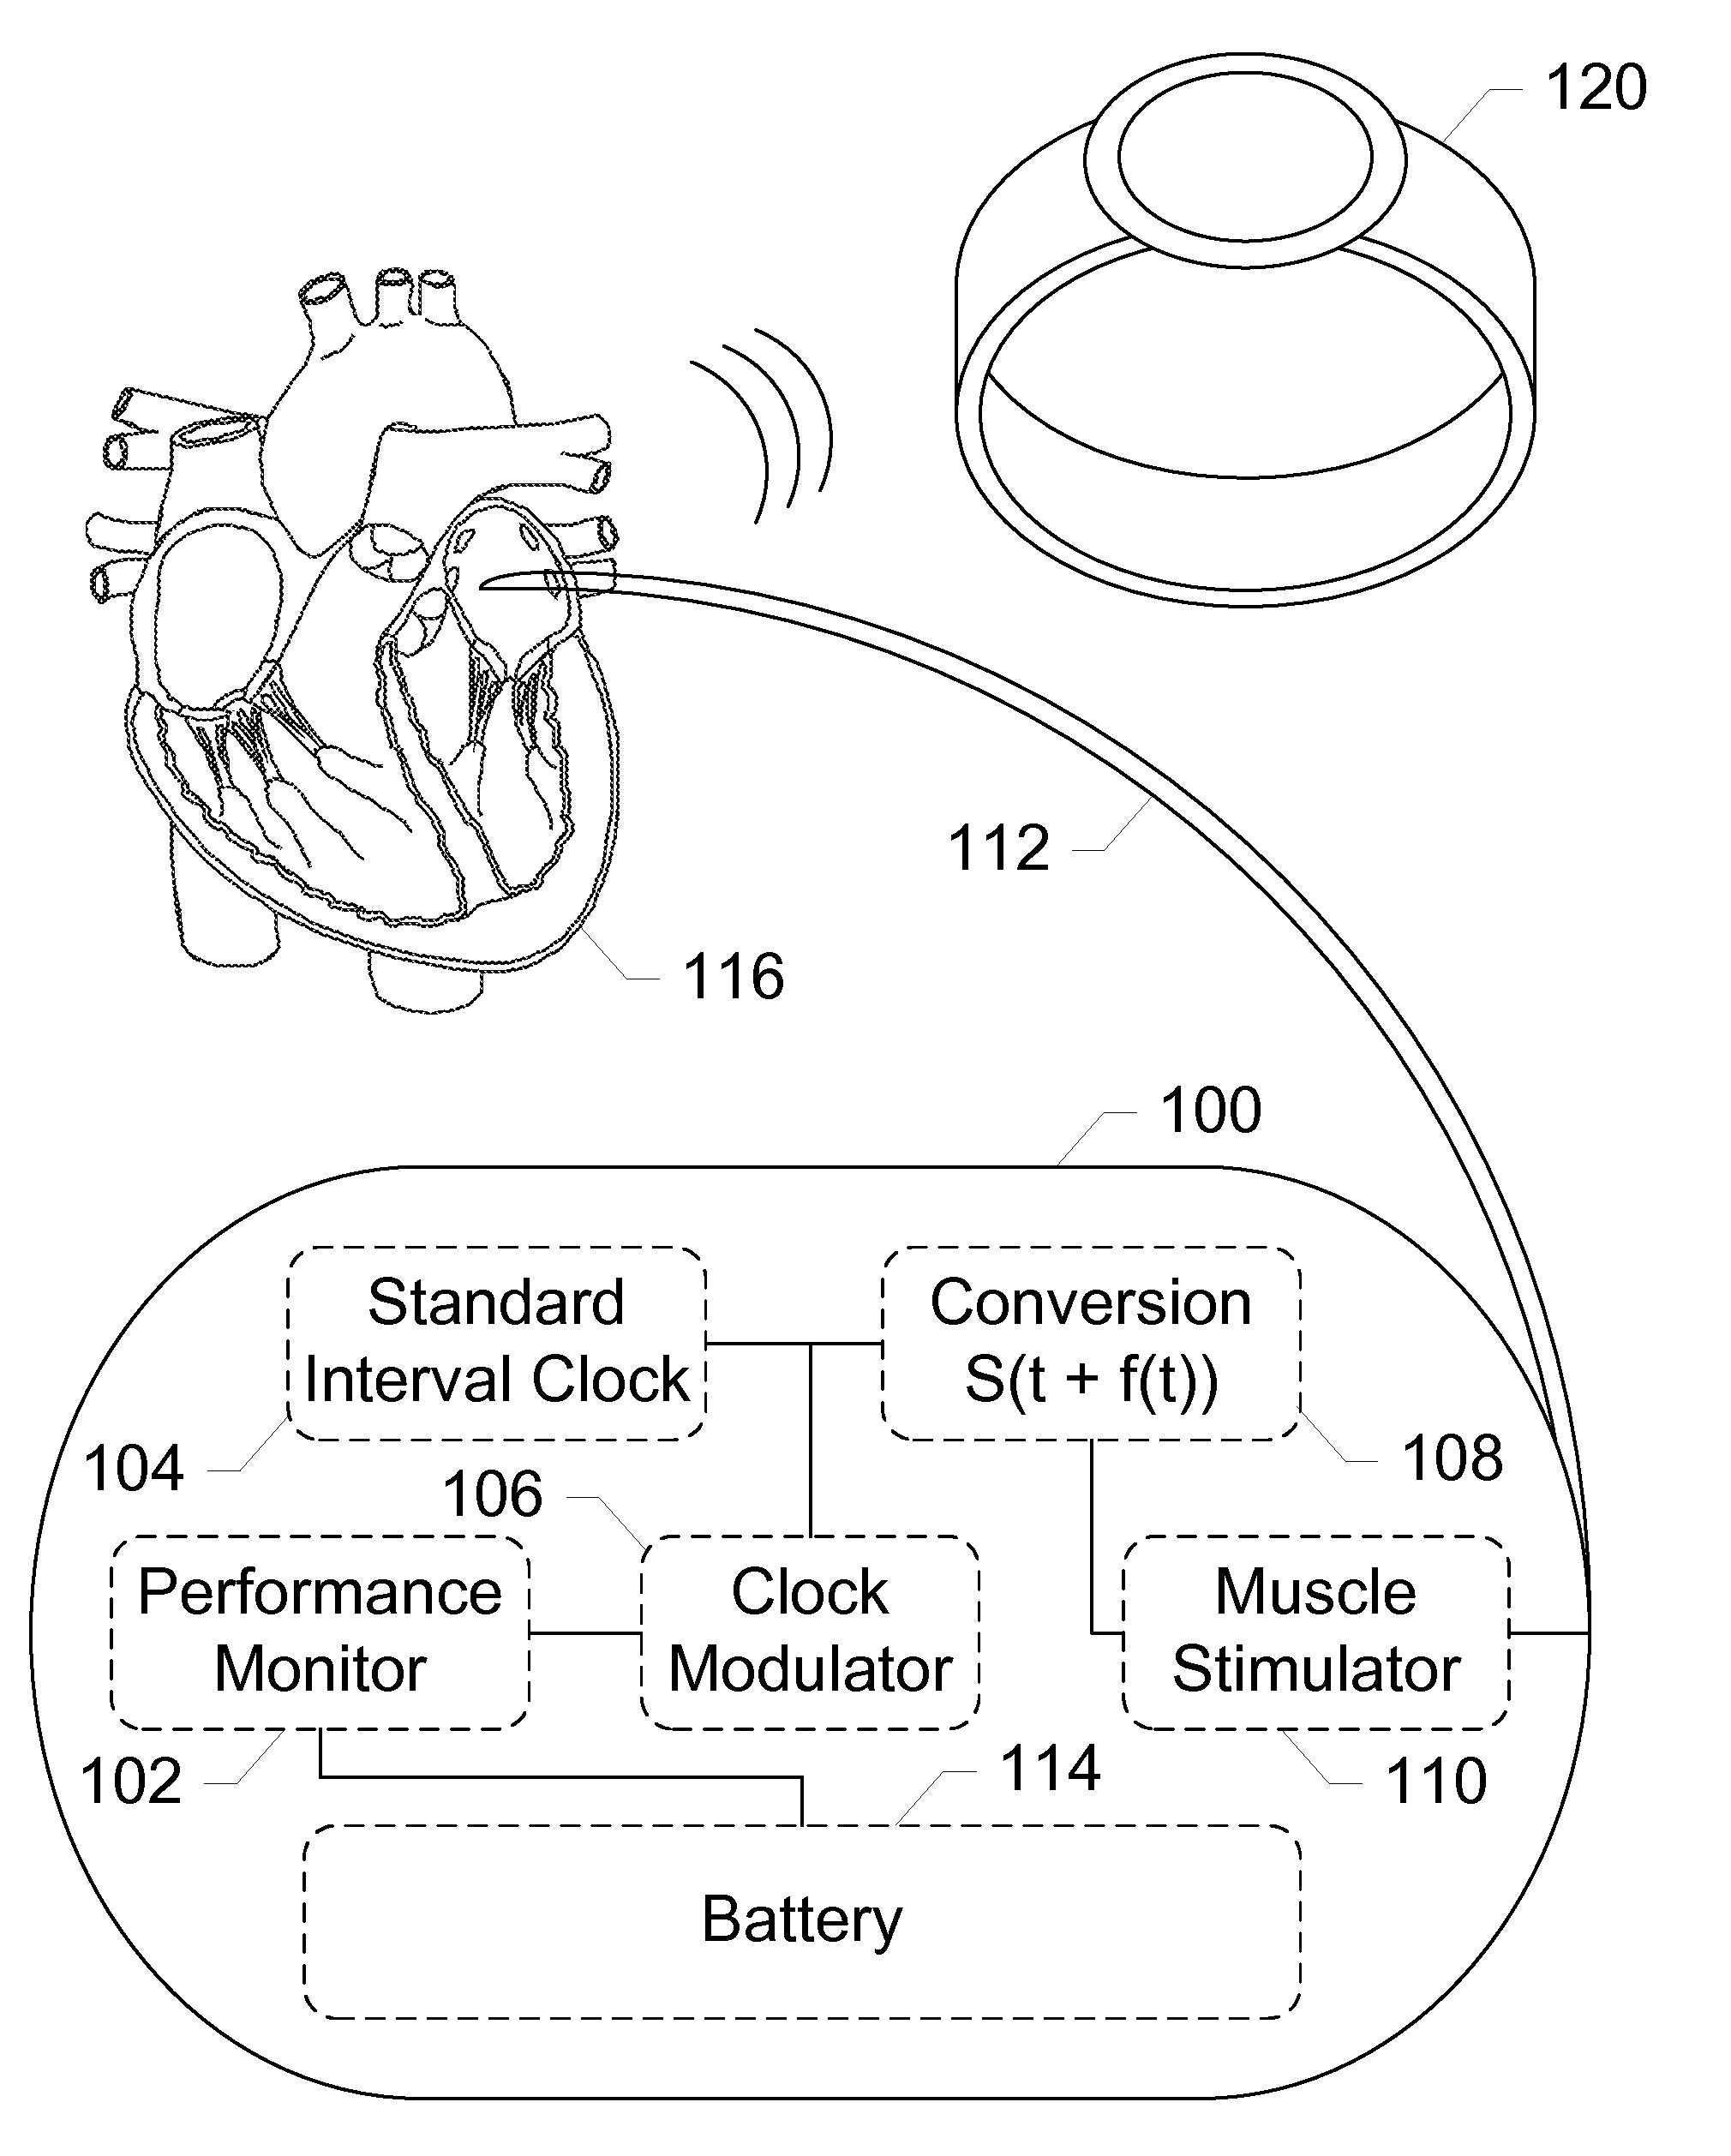 Mobile Applications and Methods for Conveying Performance Information of a Cardiac Pacemaker